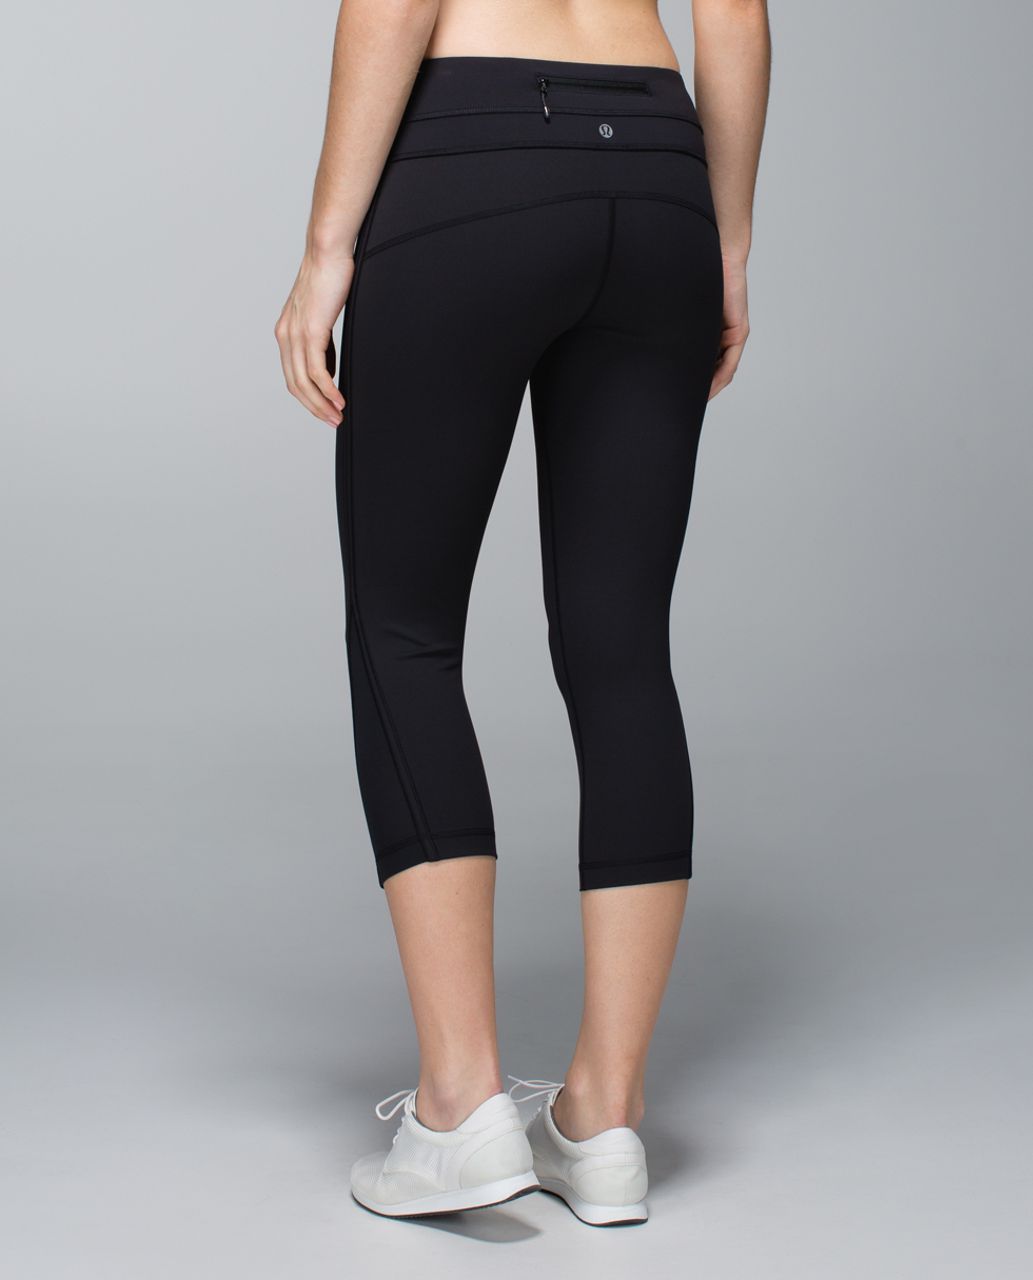 lululemon tights with zipper pockets